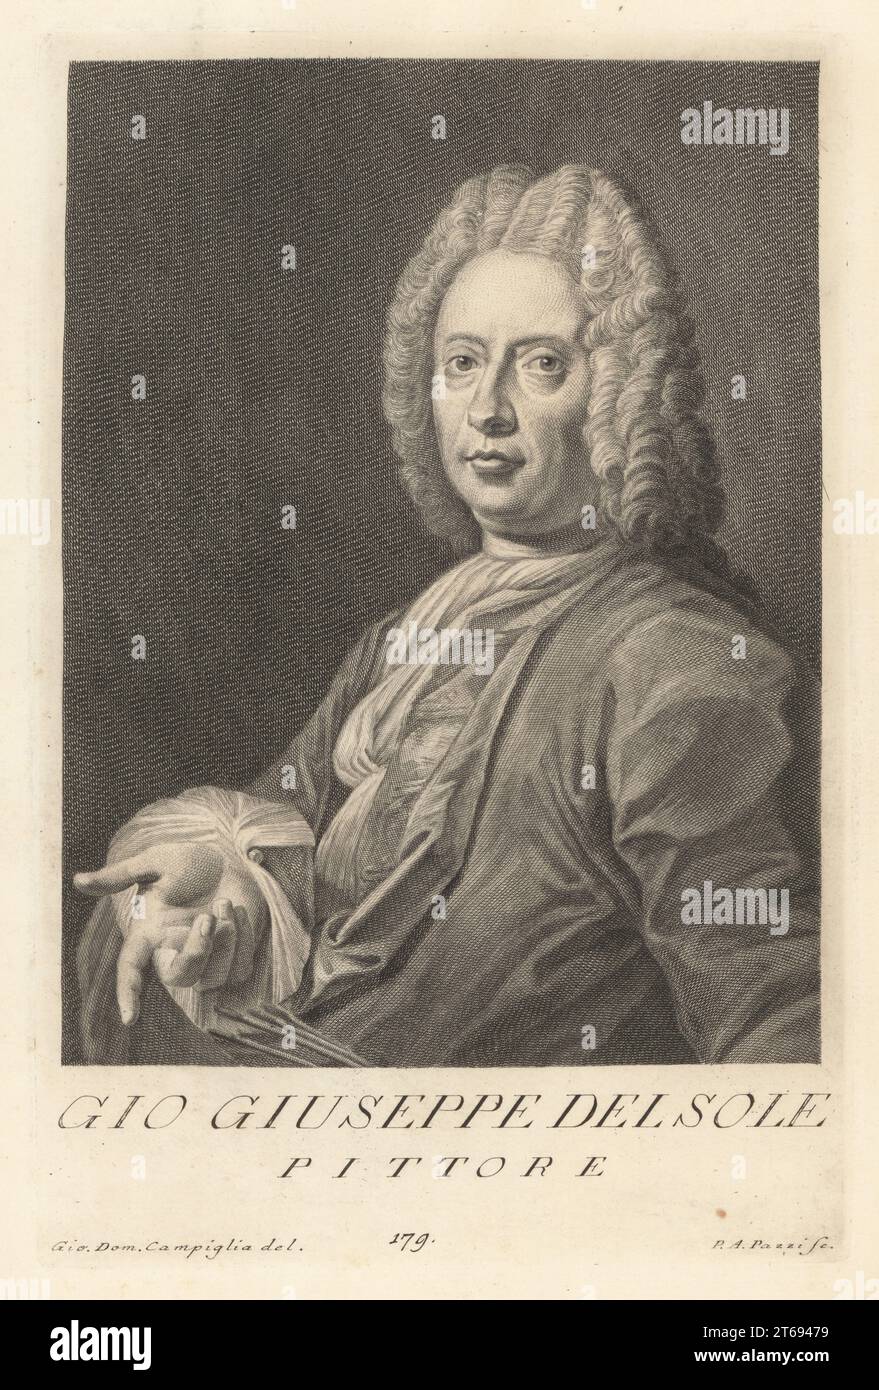 Giovanni Gioseffo dal Sole, Italian painter and engraver from Bologna, 1654-1719. Active in the late-Baroque period. In powdered wig, waistcoat and coat, holding paint brushes. Gio. Giuseppe del Sole, Pittore. Copperplate engraving by Pietro Antonio Pazzi after Giovanni Domenico Campiglia after a self portrait by the artist from Francesco Moucke's Museo Florentino (Museum Florentinum), Serie di Ritratti de Pittori (Series of Portraits of Painters) stamperia Mouckiana, Florence, 1752-62. Stock Photo